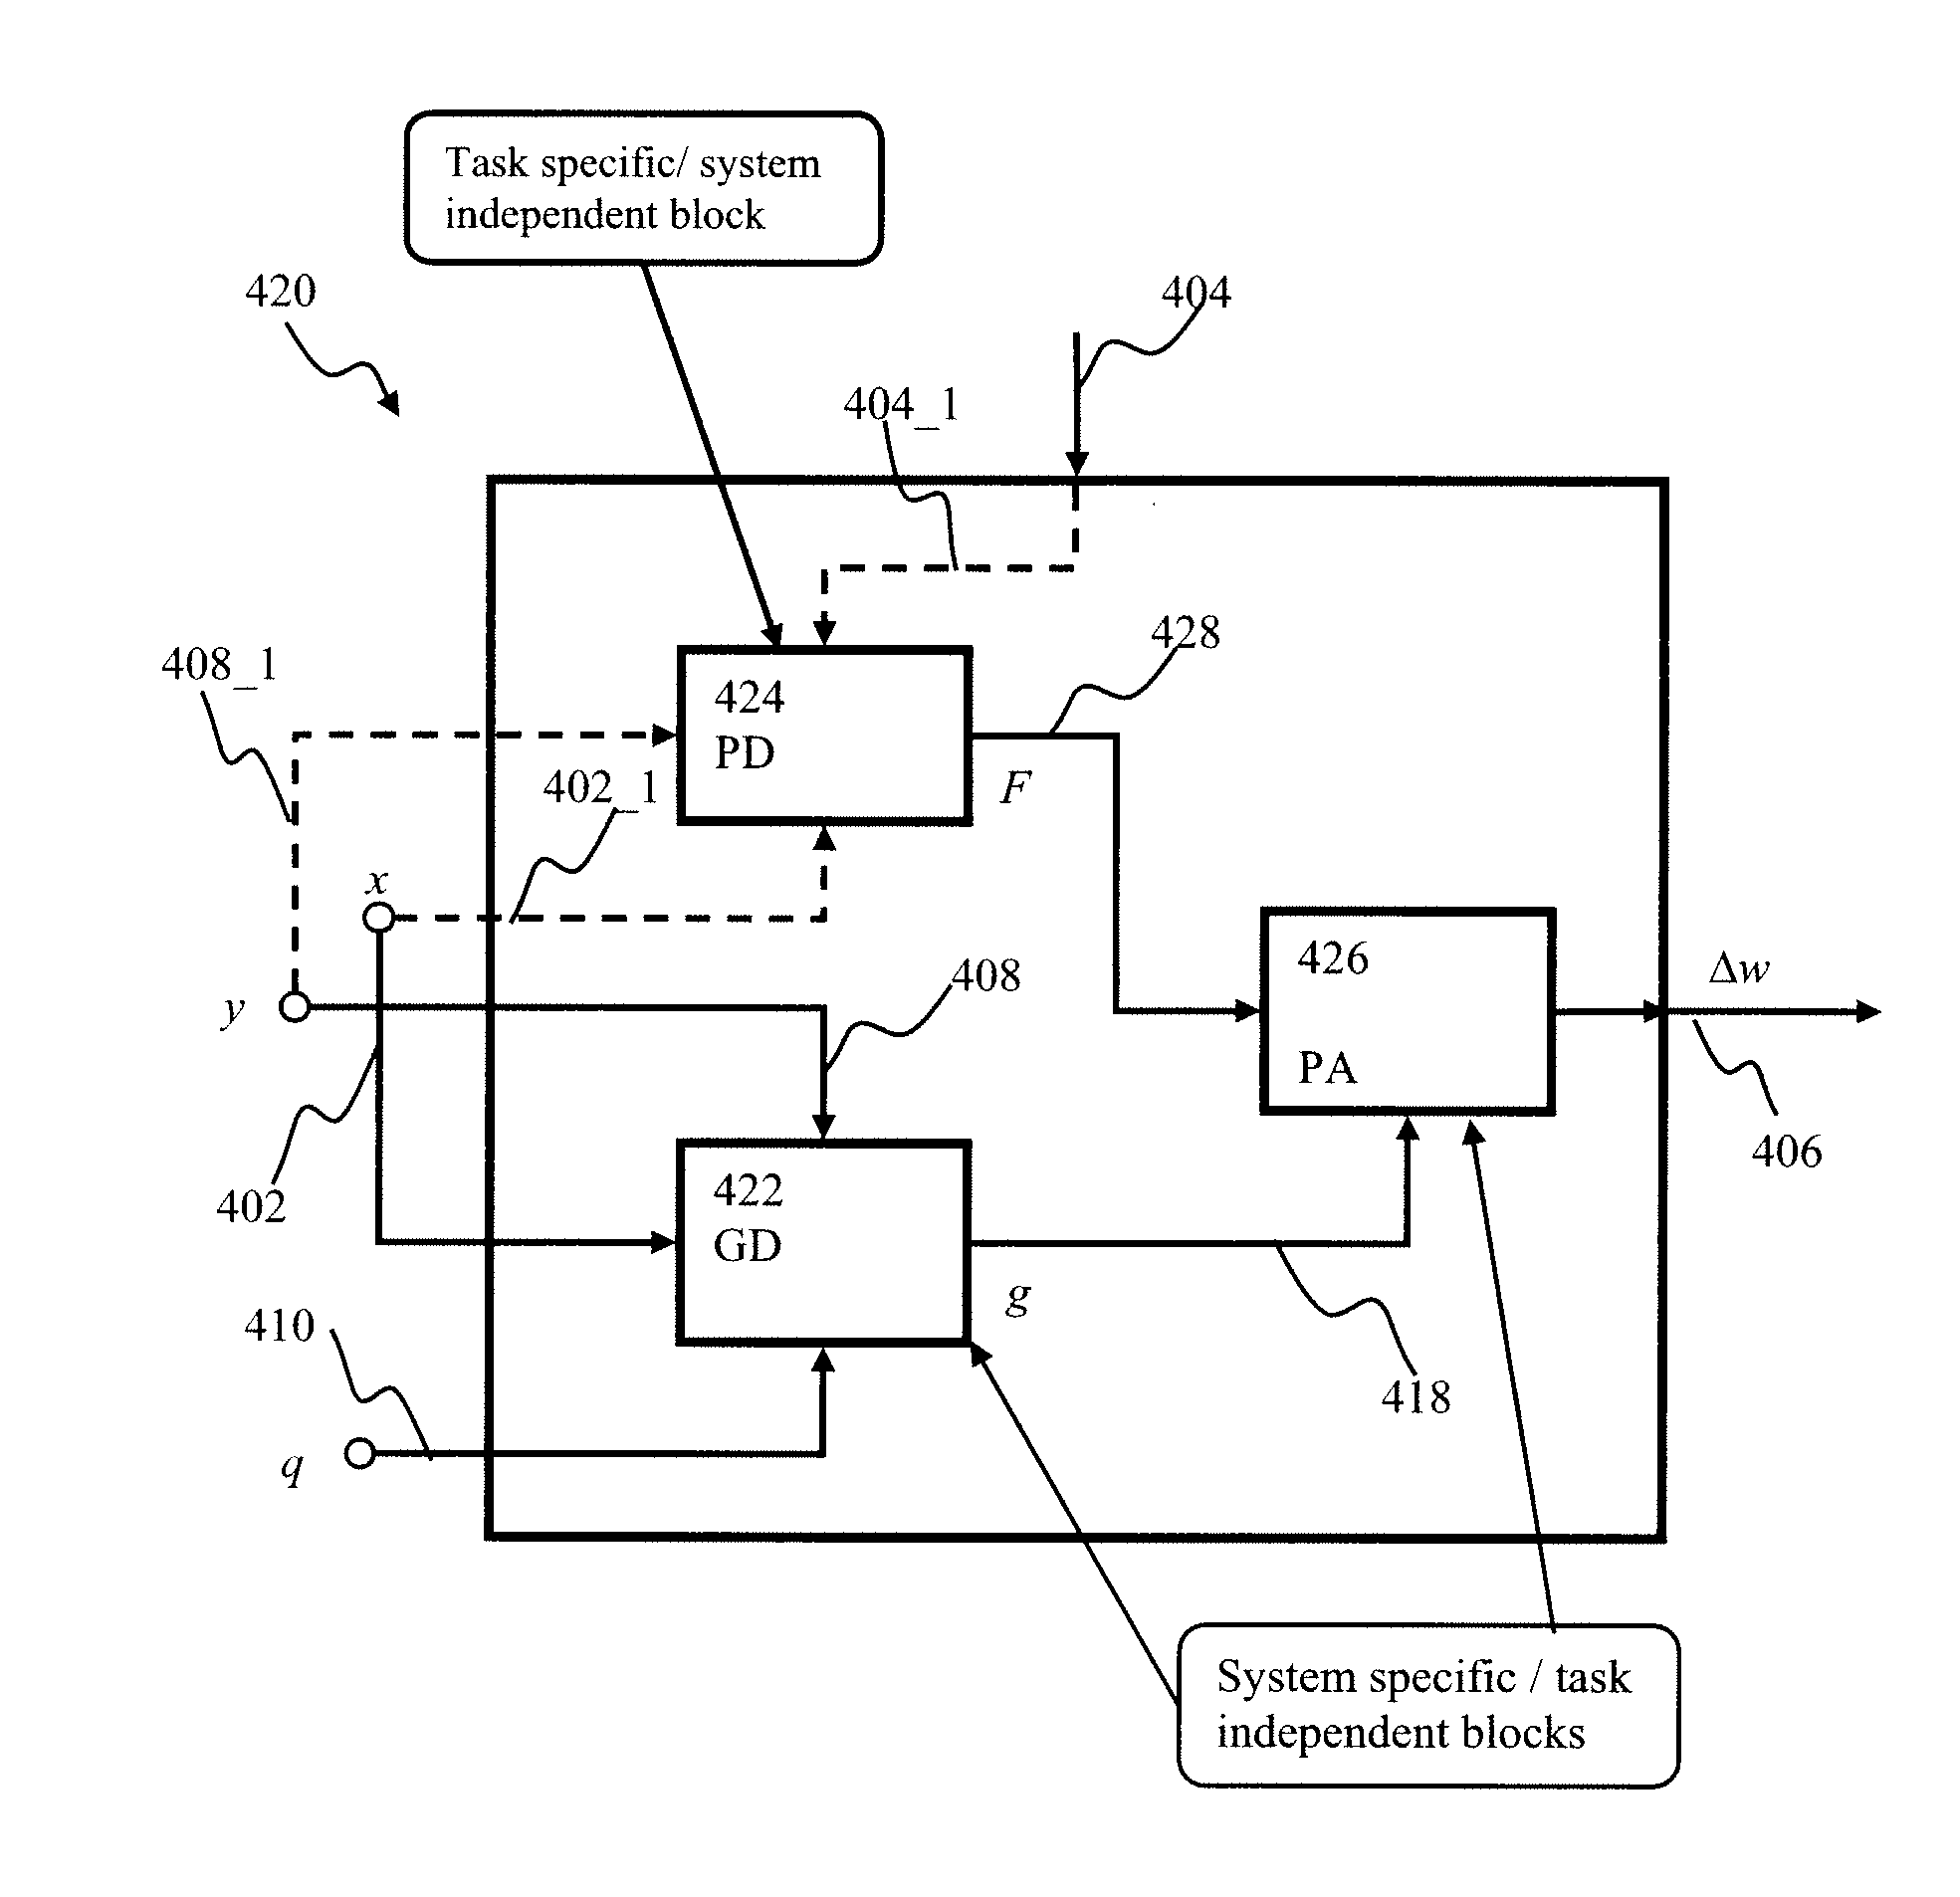 Stochastic apparatus and methods for implementing generalized learning rules